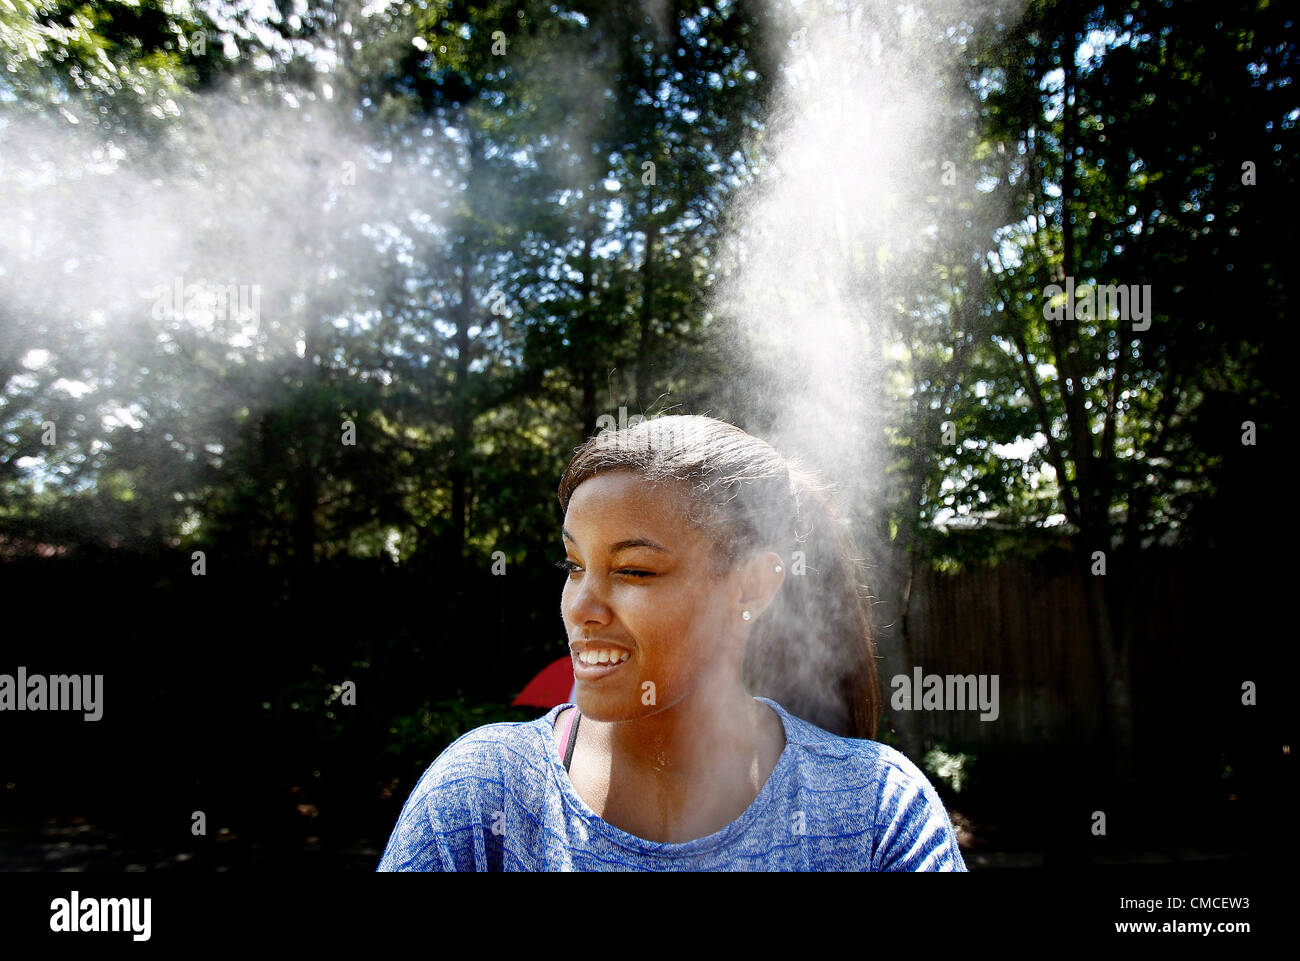 July 17, 2012 - Memphis, TN, U.S. - July 17, 2012 - Maryah Smith, 16, (cq) cools off in a misting hose at the Memphis Zoo during a hot Tuesday afternoon. The Memphis Zoo offers free admission to Tennessee residents on Tuesday afternoons from 2 p.m. to close. (Credit Image: © Mark Weber/The Commercial Appeal/ZUMAPRESS.com) Stock Photo